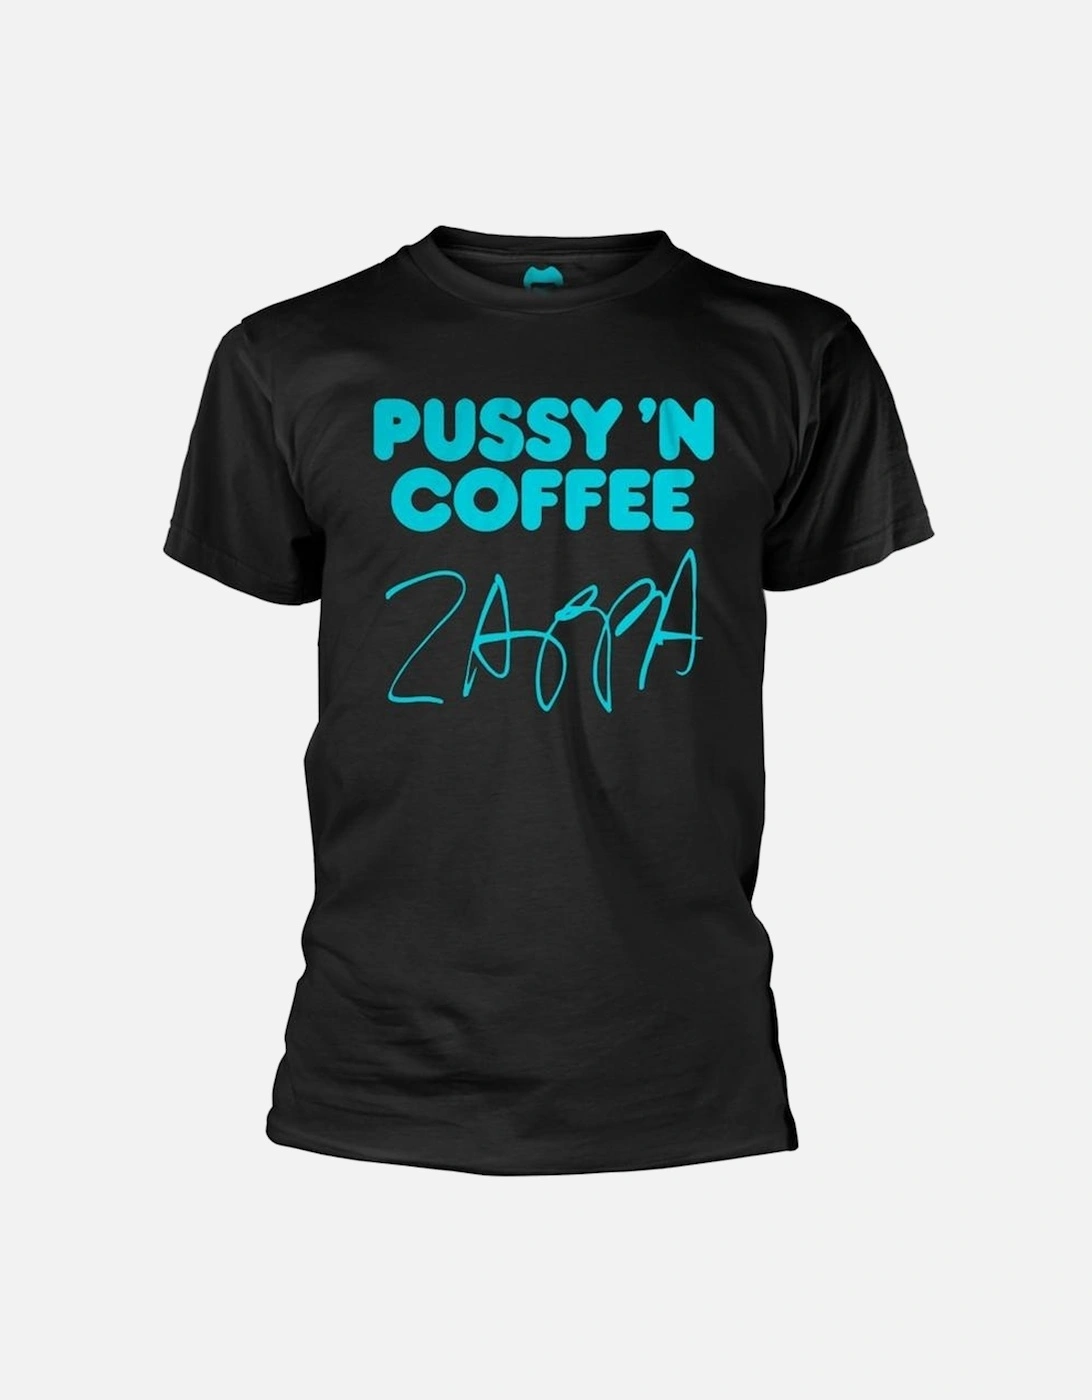 Unisex Adult Pussy N Coffee T-Shirt, 2 of 1